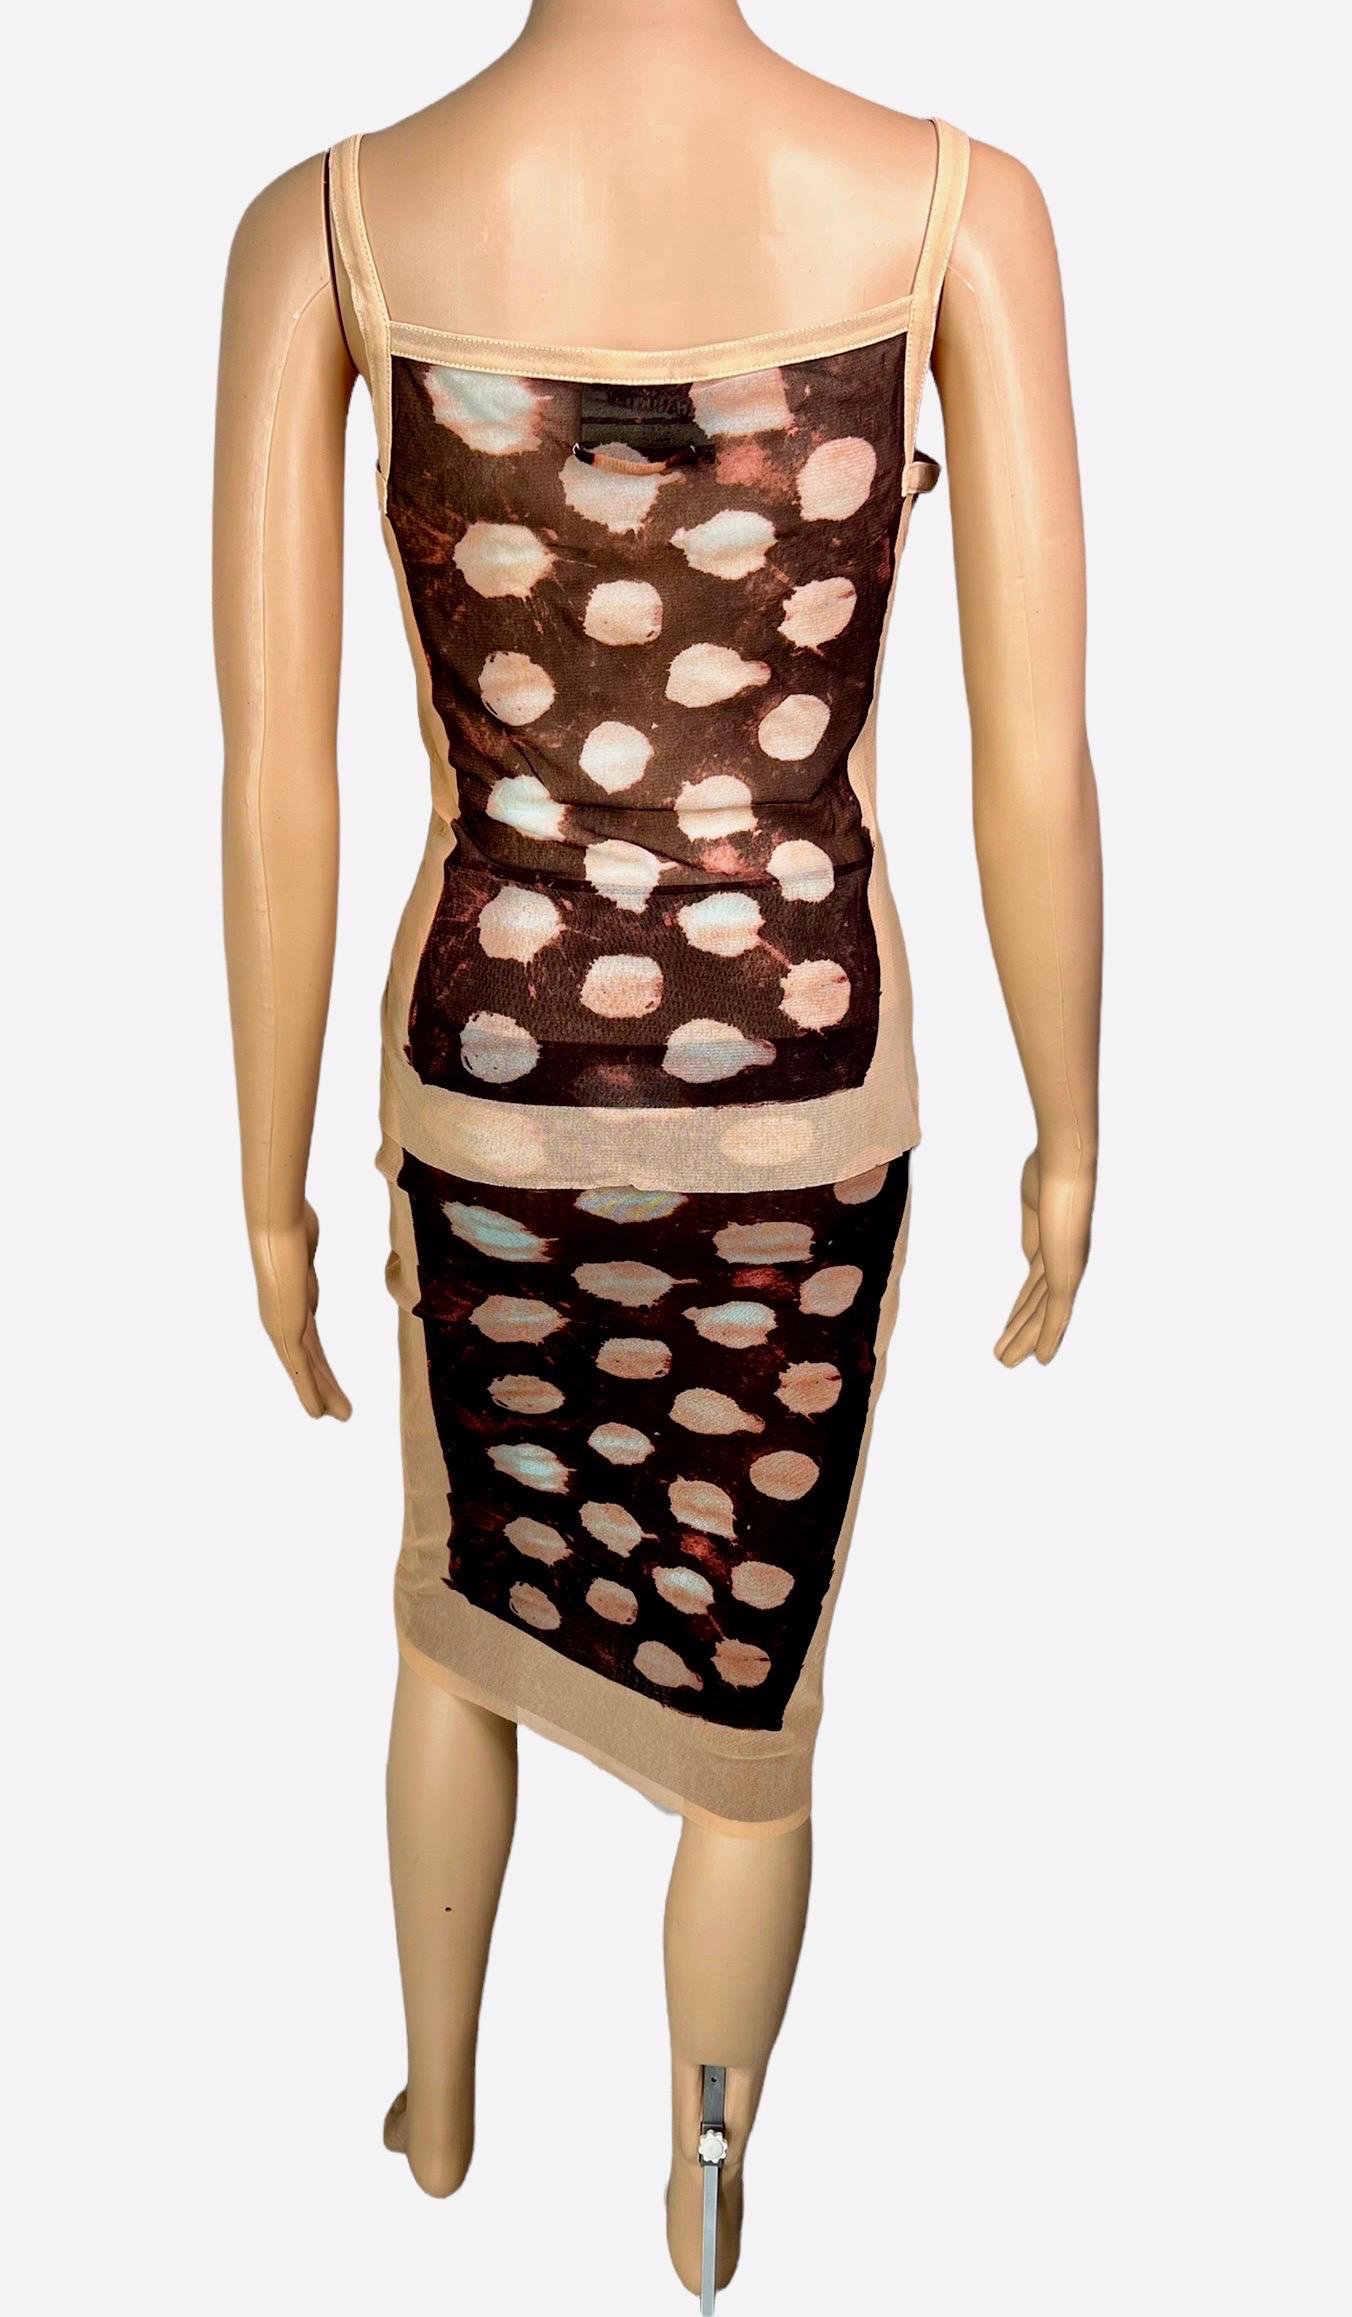 Jean Paul Gaultier S/S 2001 Sheer Polka Dot Cardigan Top and Skirt 3 Piece Set For Sale 1